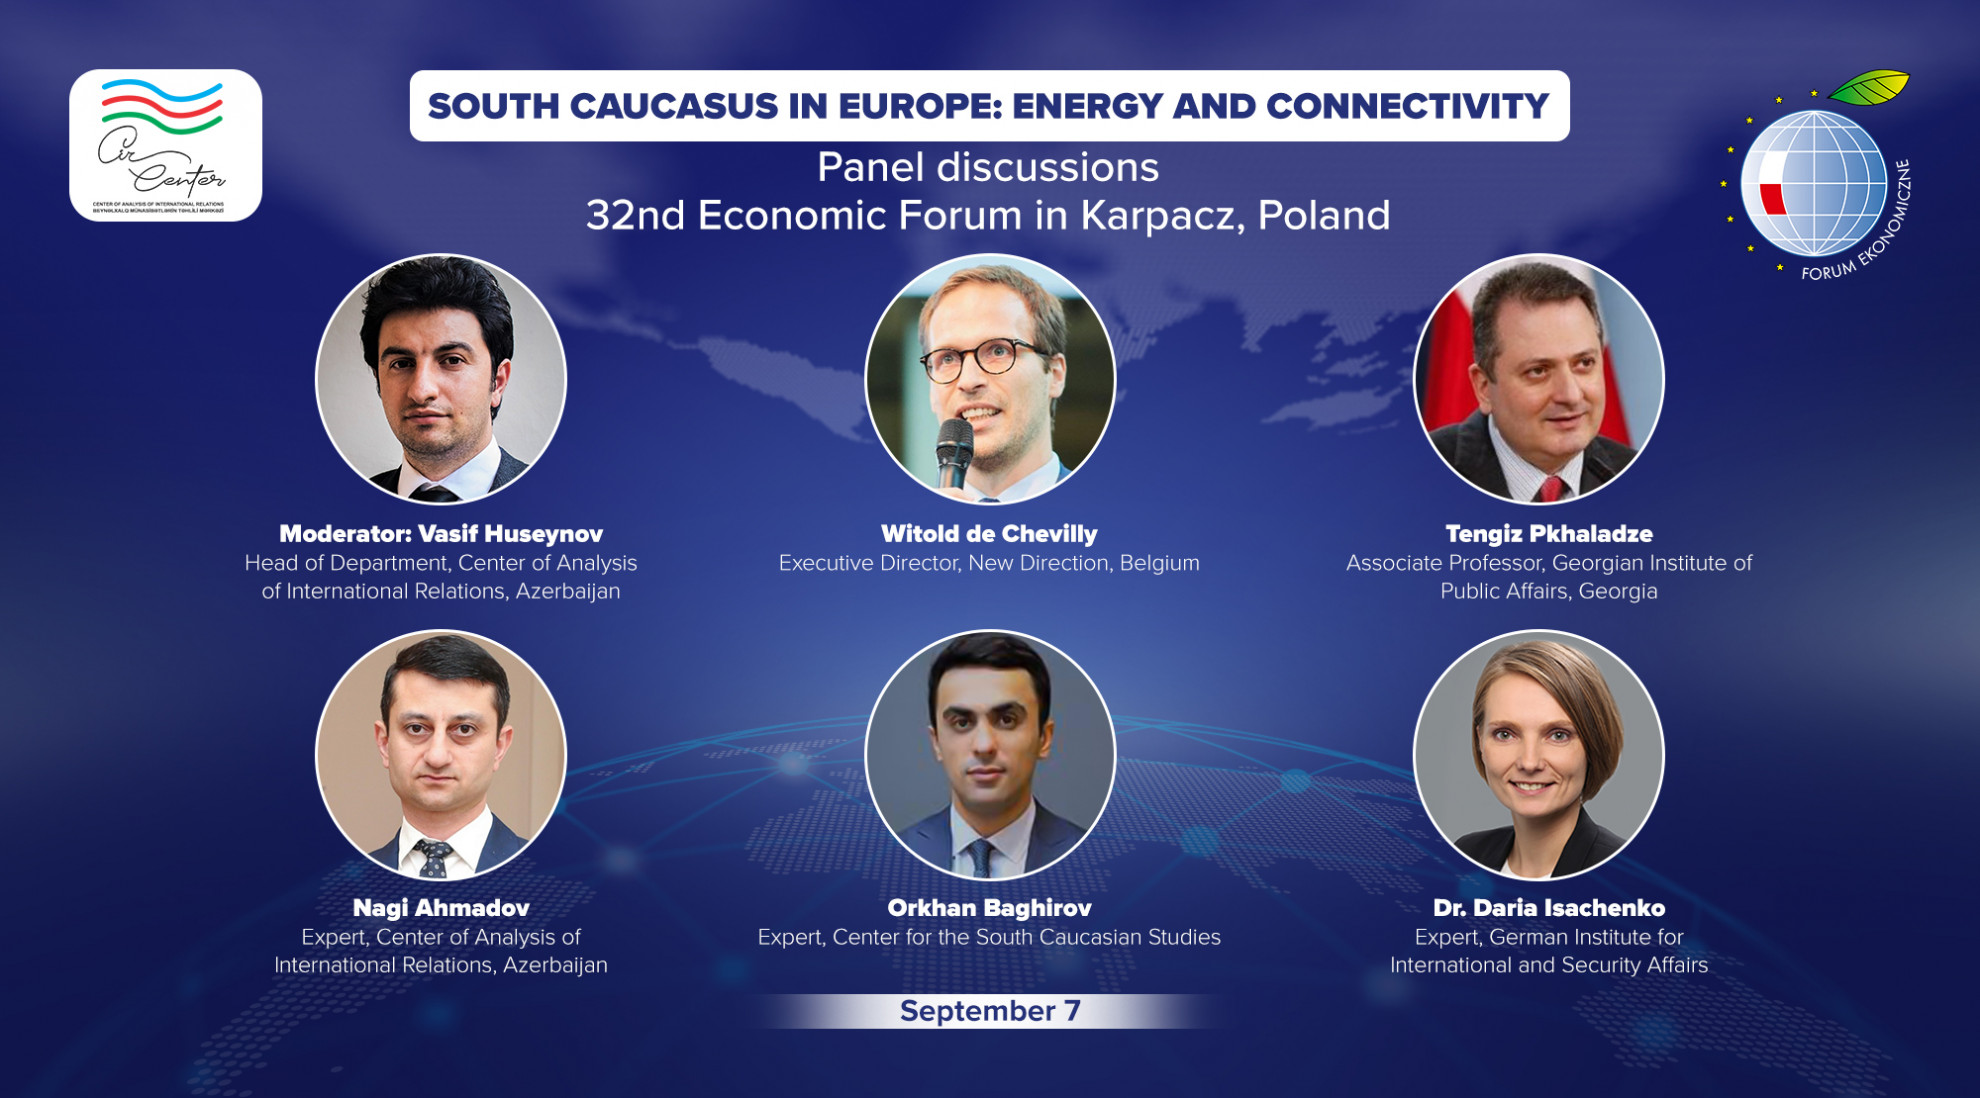 Panel discussions on “South-Caucasus in Europe: Energy and Connectivity” were held within the Karpacz Economic Forum